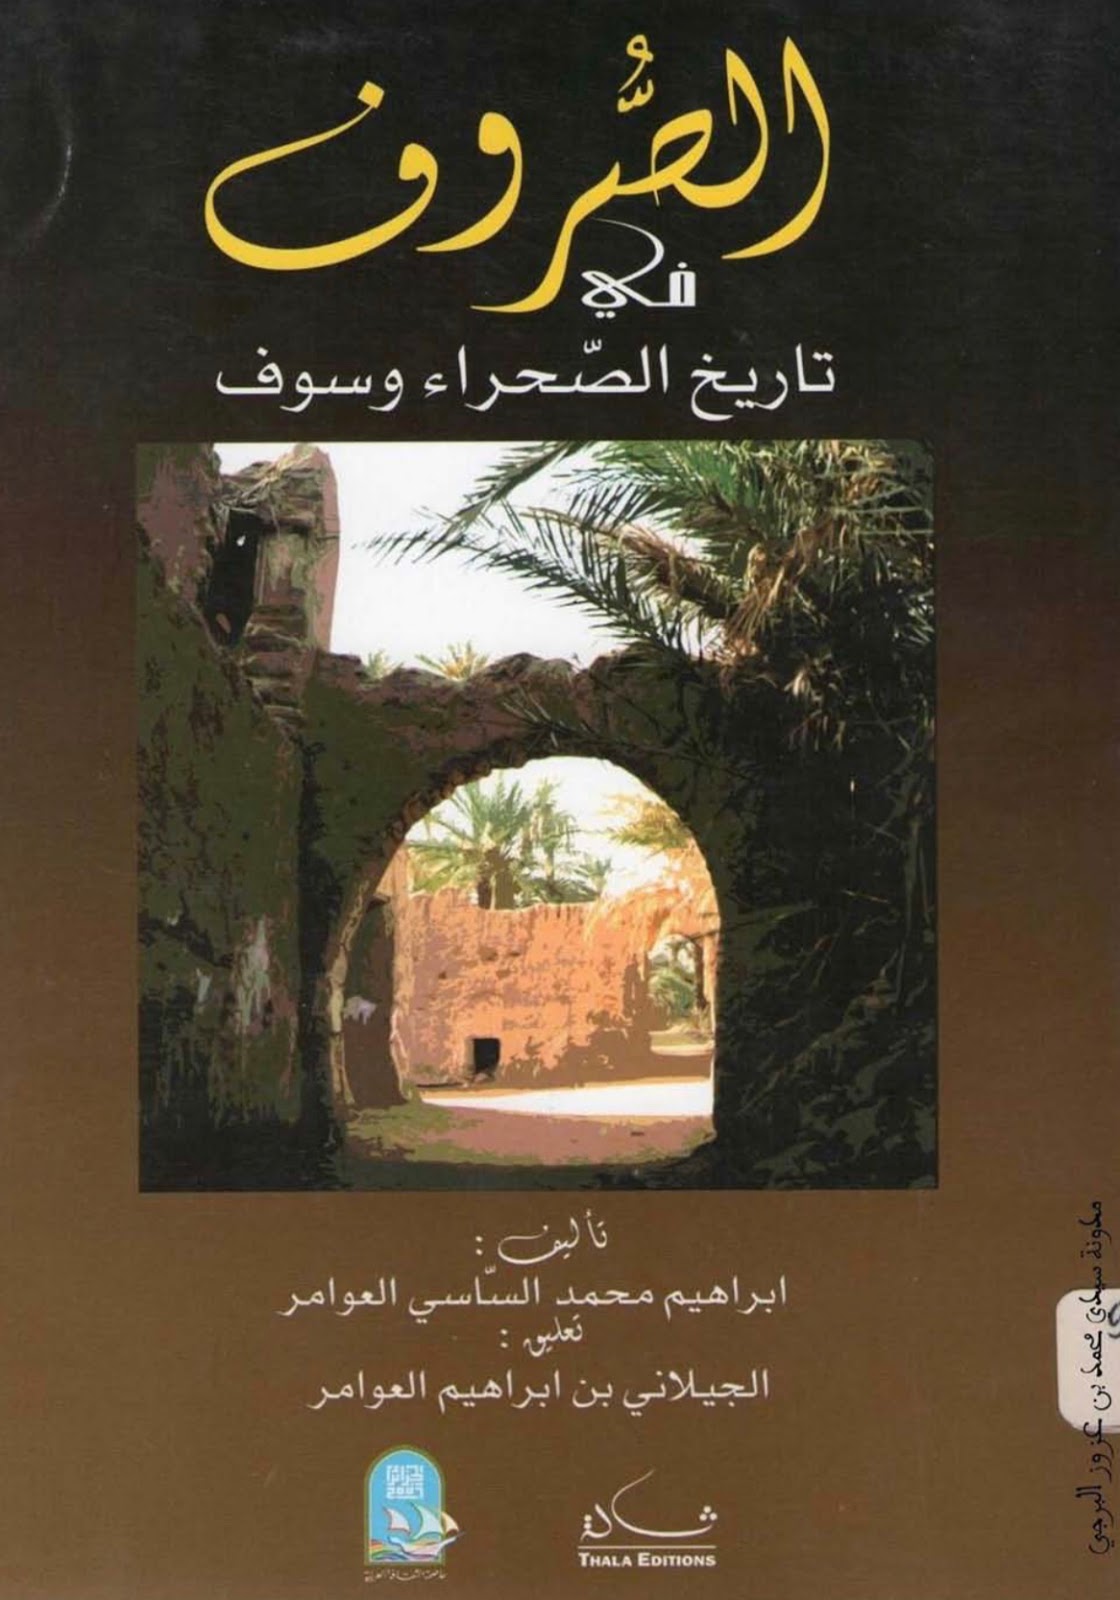 م ك ت ب ة ع ل و م الن س ب Genealogical Library Science 2016